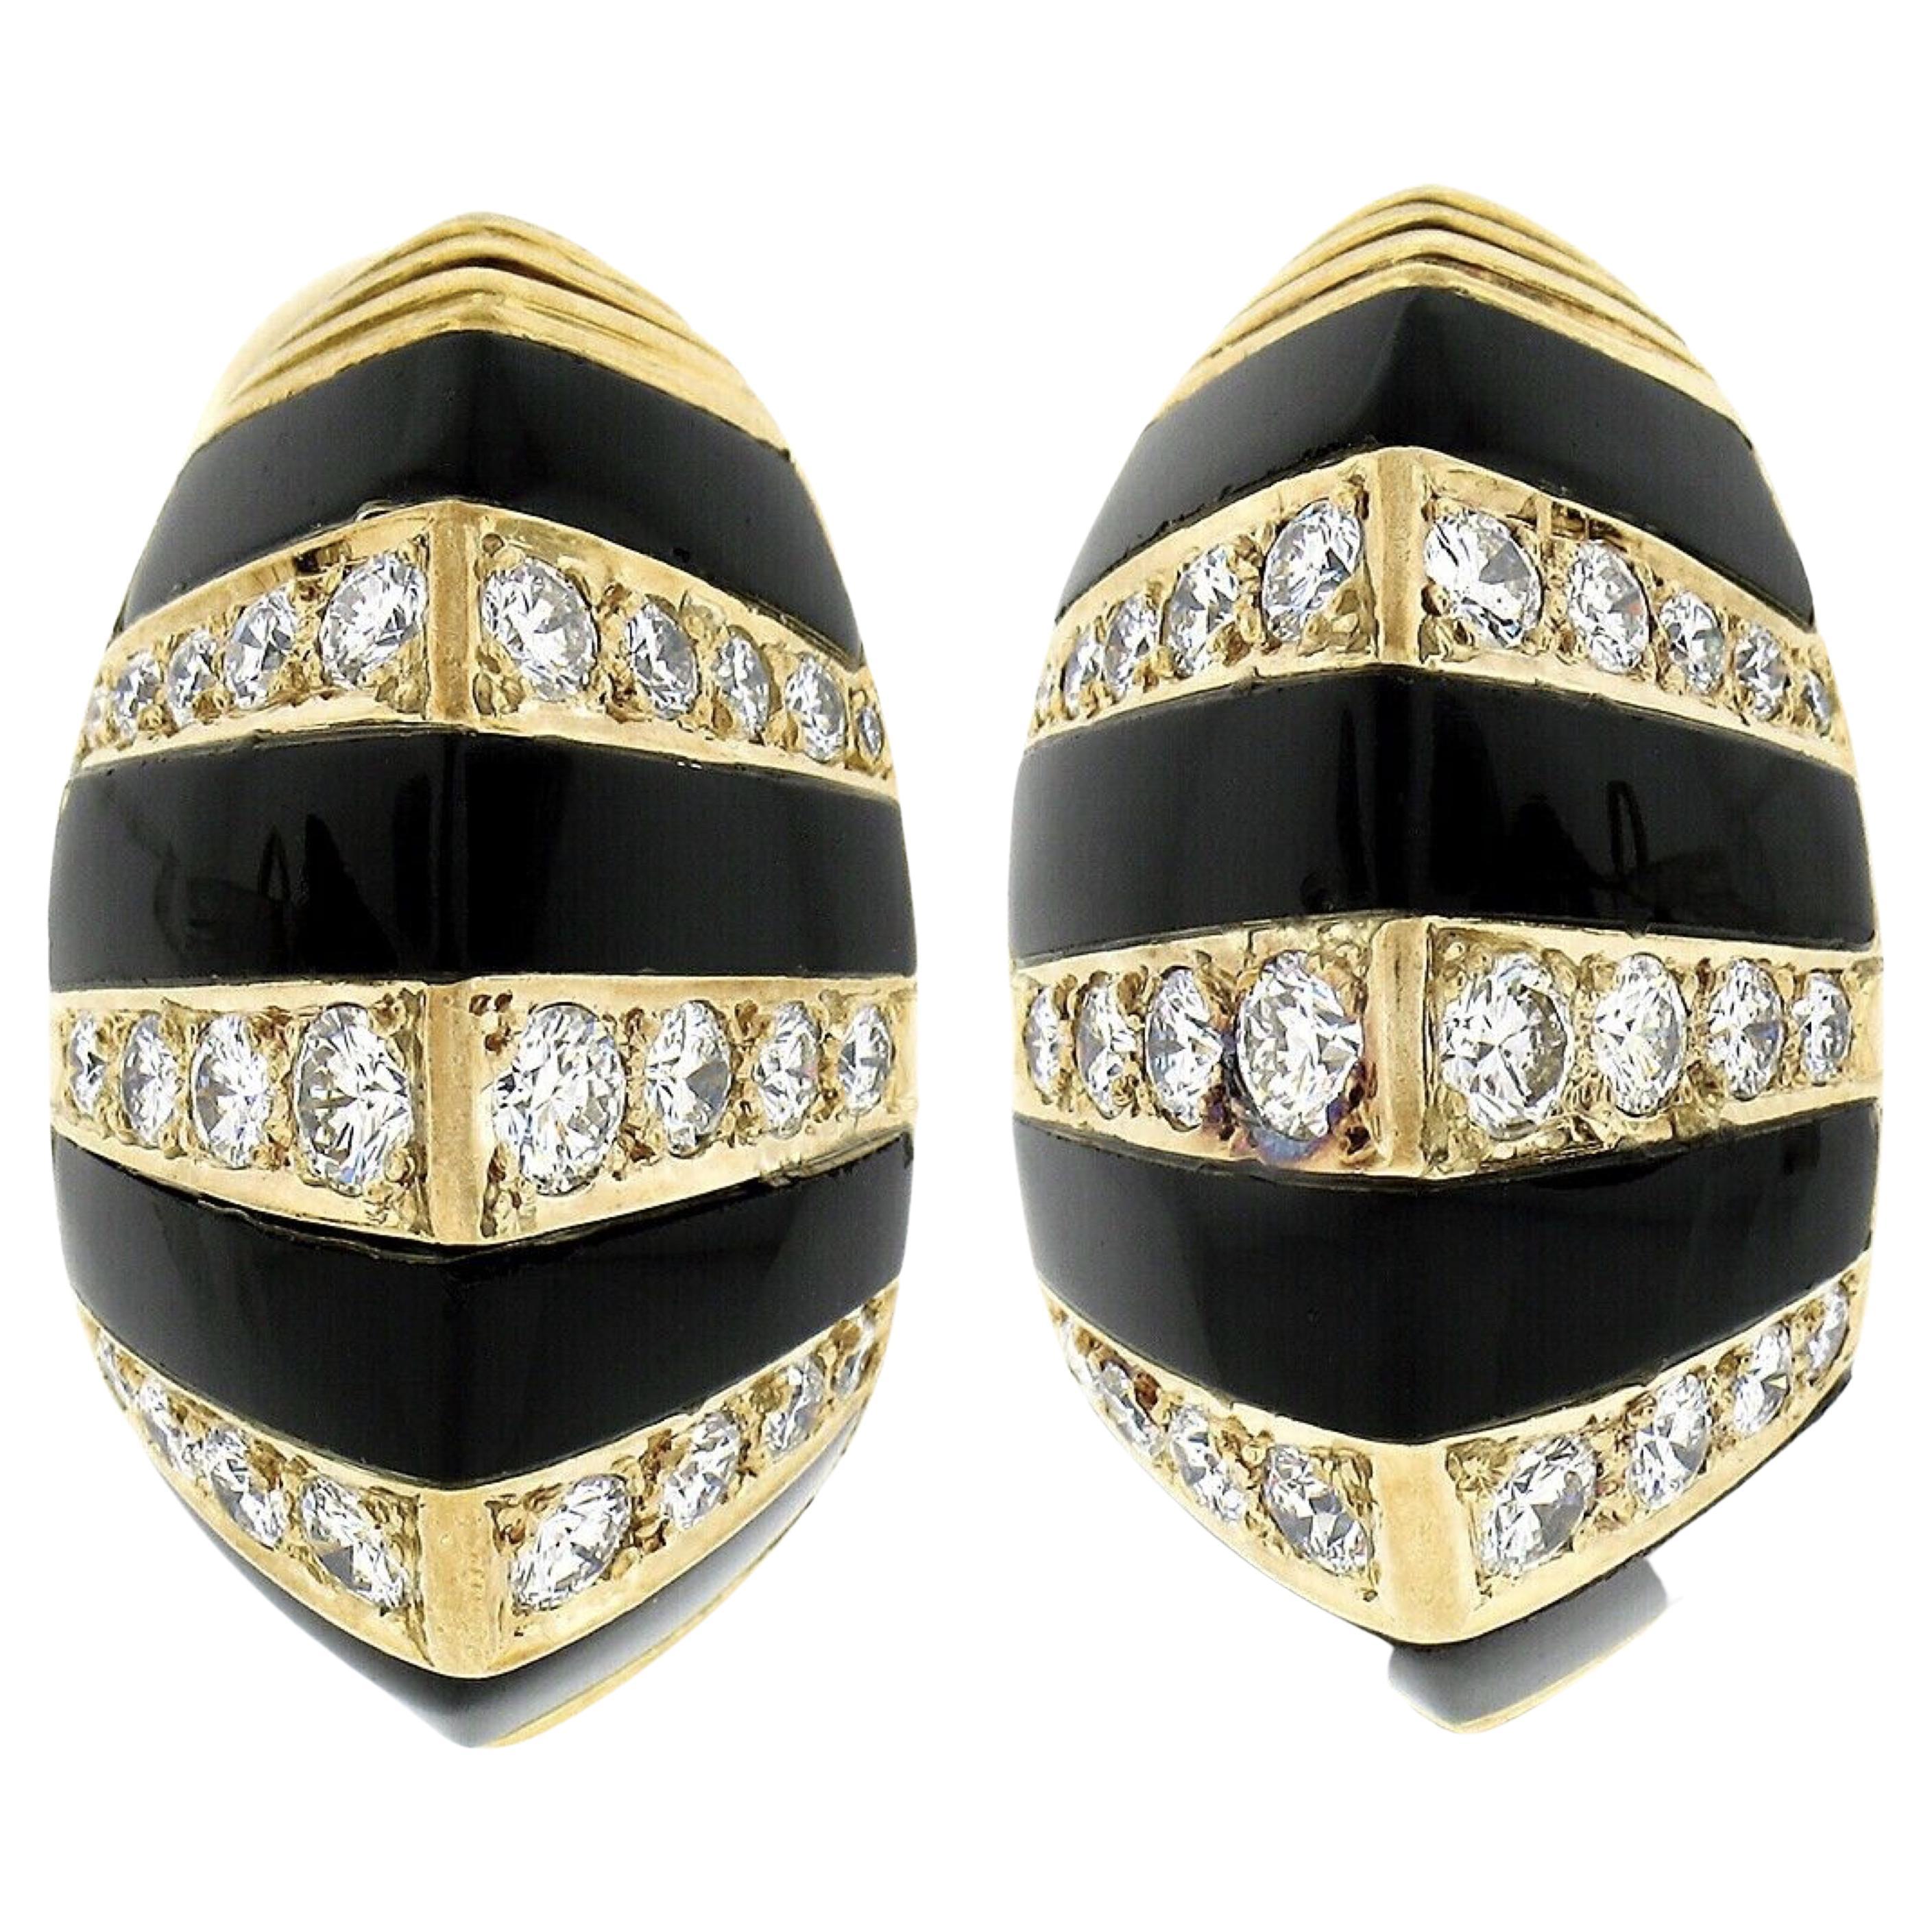 Vintage 18k Gold Inlaid Black Onyx & Pave Diamond Striped Domed Button Earrings For Sale